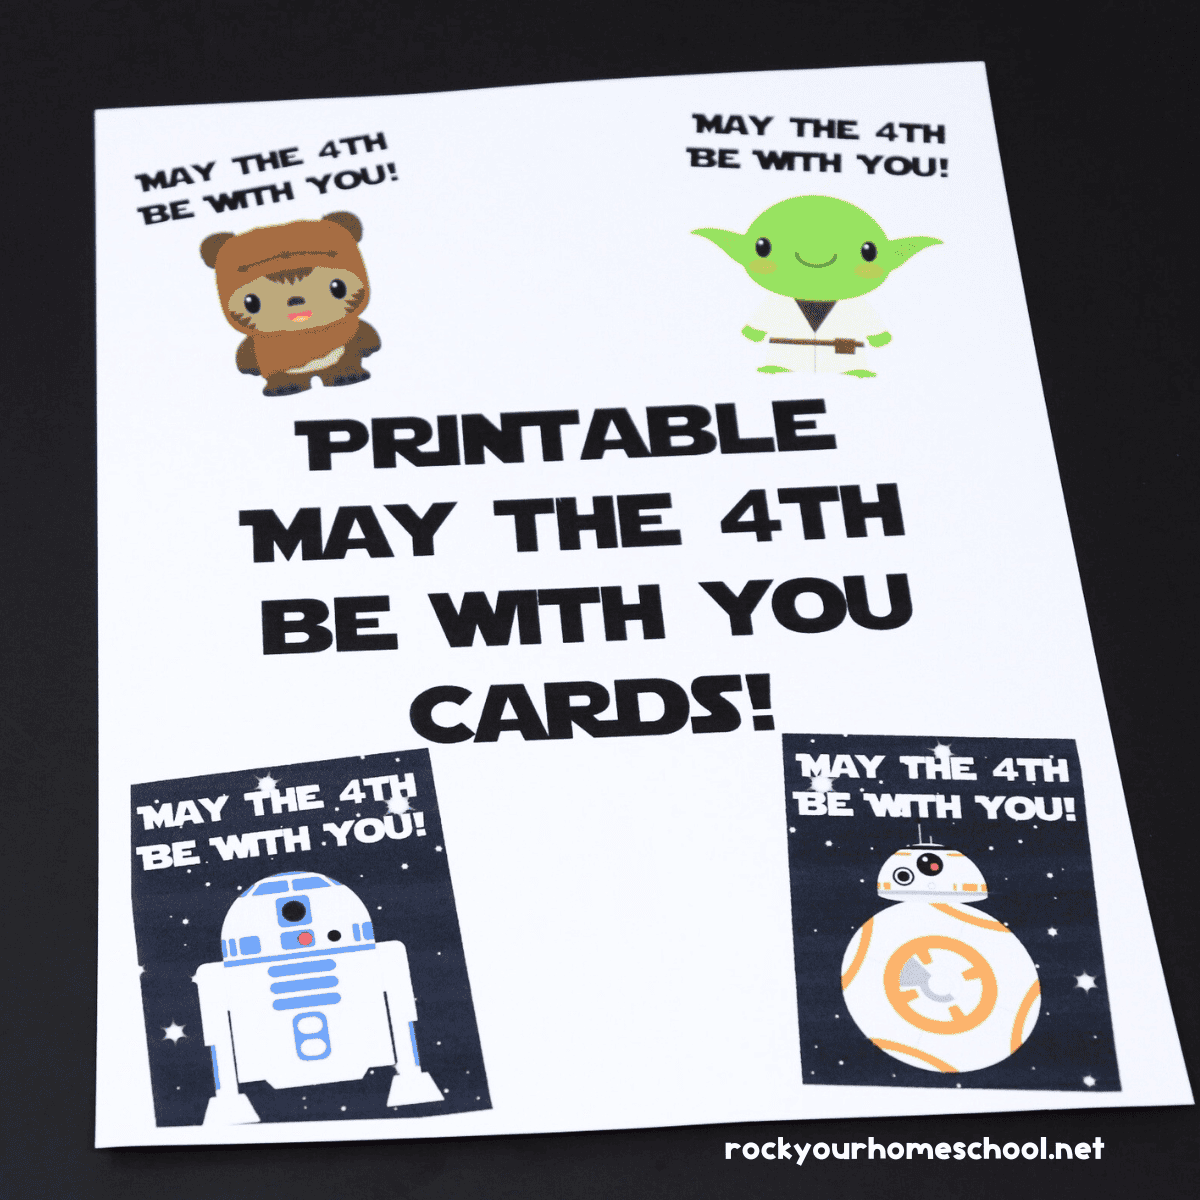 Cover for free printable May the 4th Be With You Cards for Star Wars Day fun.